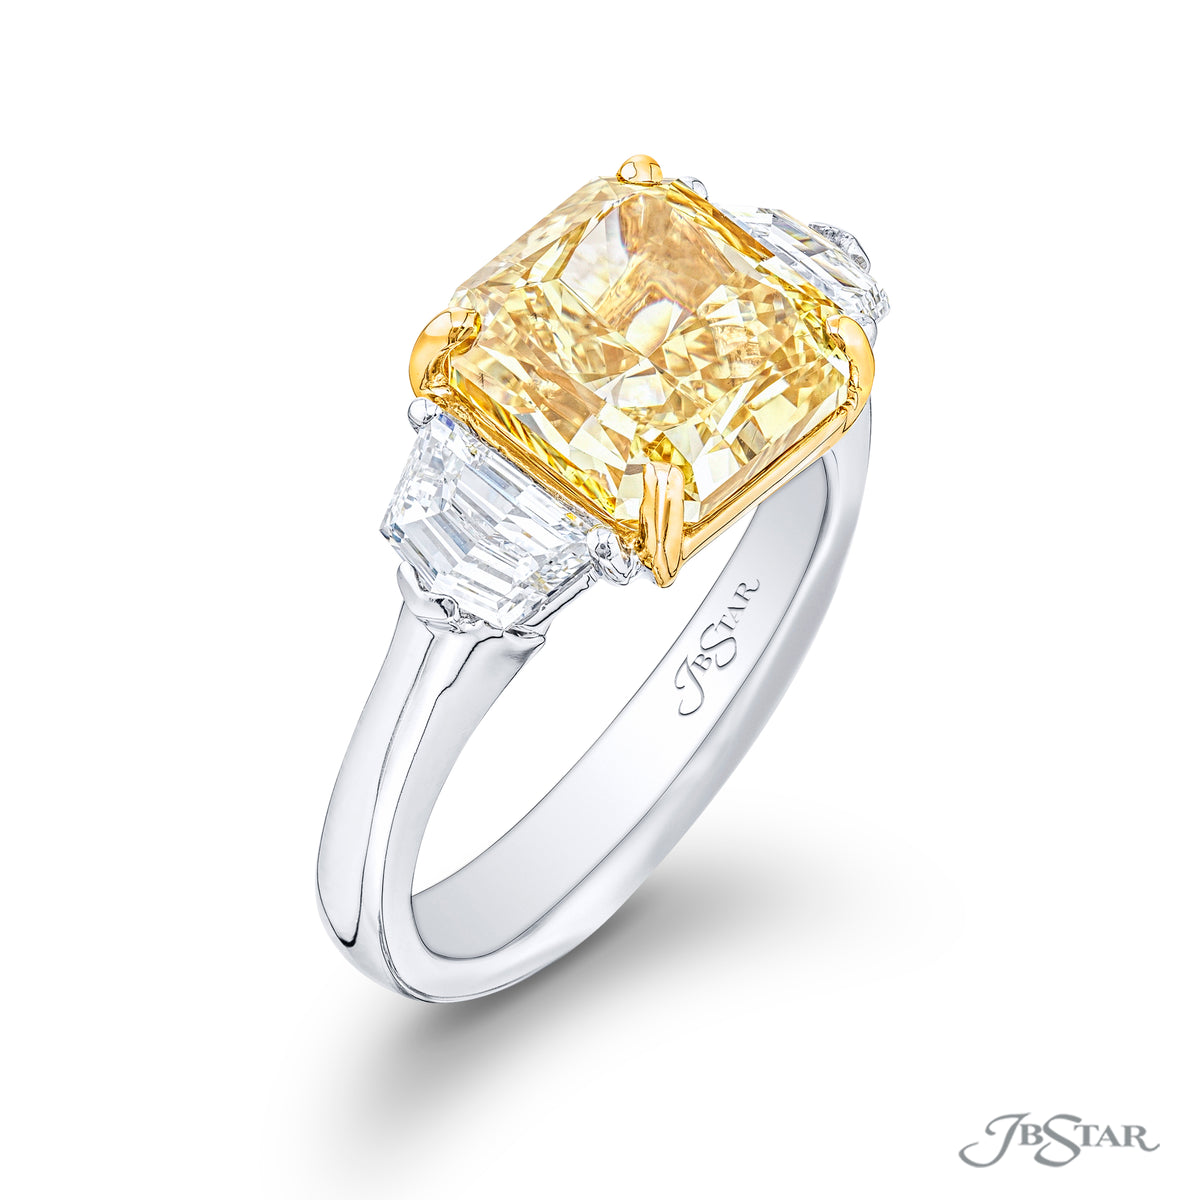 JB Star Platinum and 18K Yellow Gold Ring with a 4.57ct Fancy Deep Yellow Radiant Cut Diamond